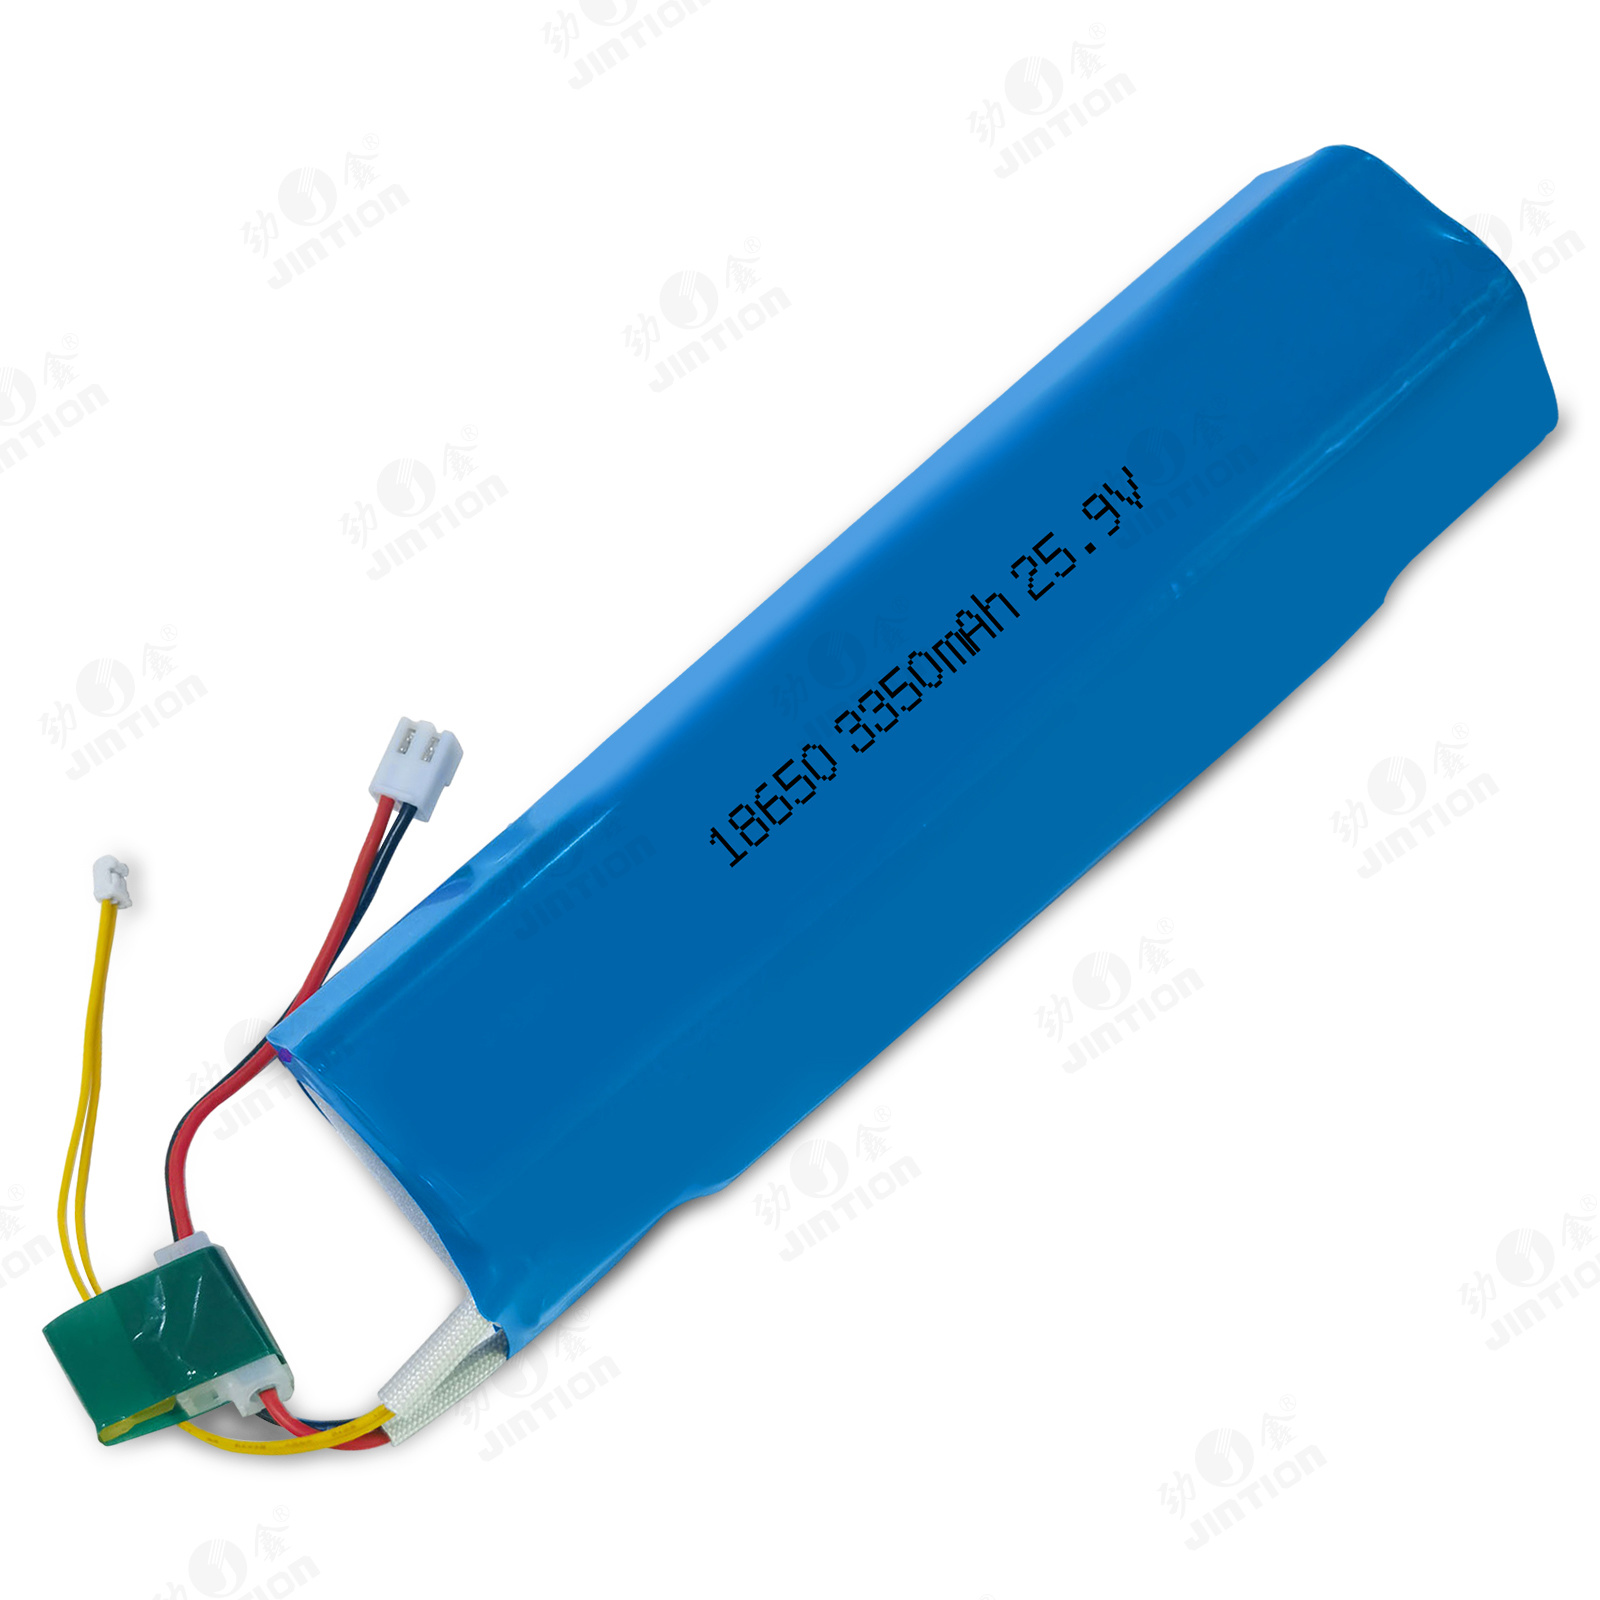 JINTION 18650 3350mah 25.9V 5C battery for Underwater cleaner LG18650 head side wrapped with green tea glue